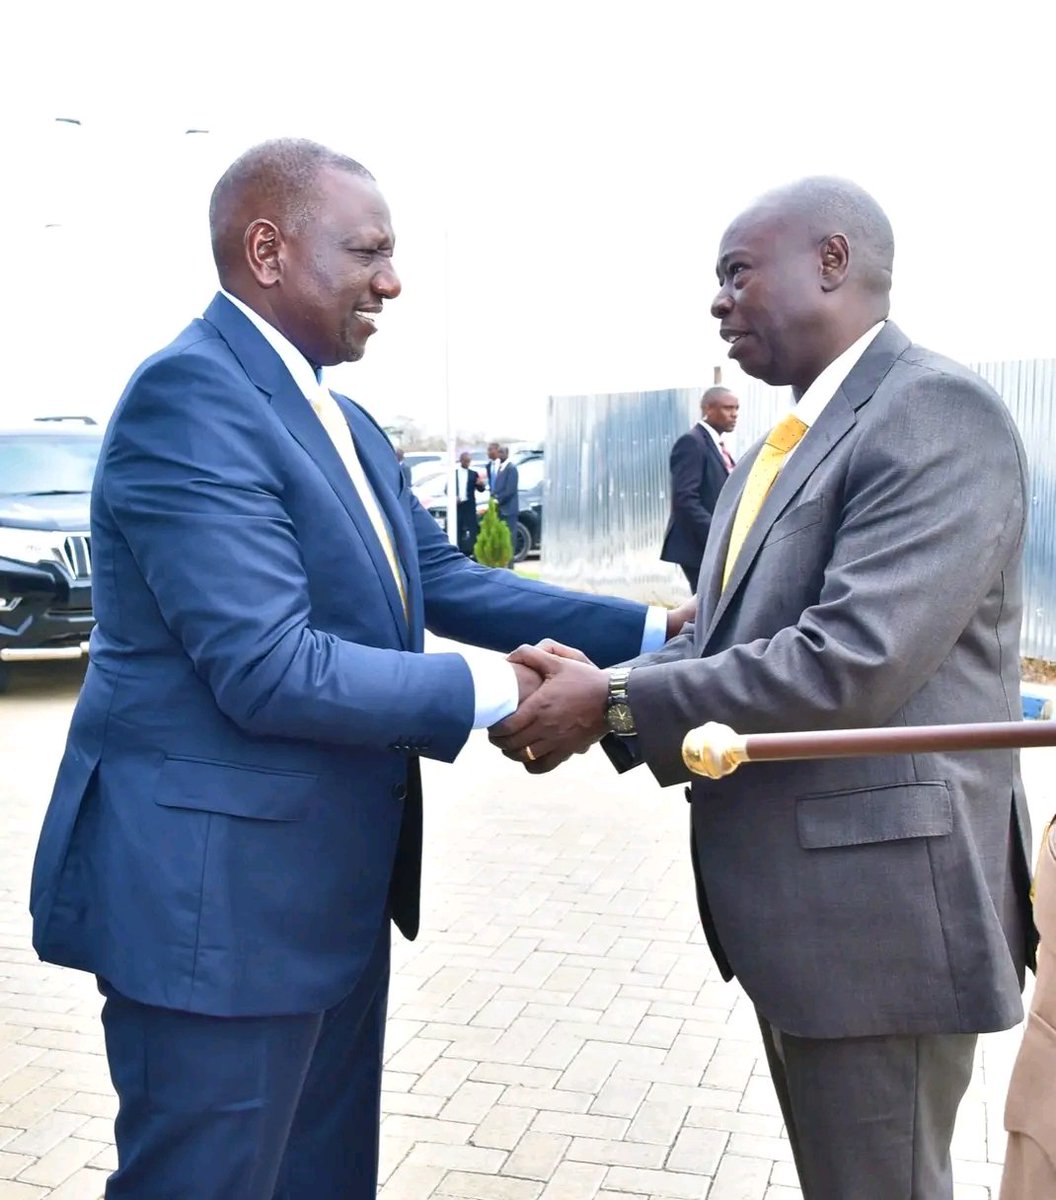 H.E Riggy G should have time with his boss President William Ruto and create a position for Baba. Surely, Baba has fought a good battle and he should be protected and respected too.

Happy Utamaduni Day Wakenya wenzangu.
#HappyUtamaduniday